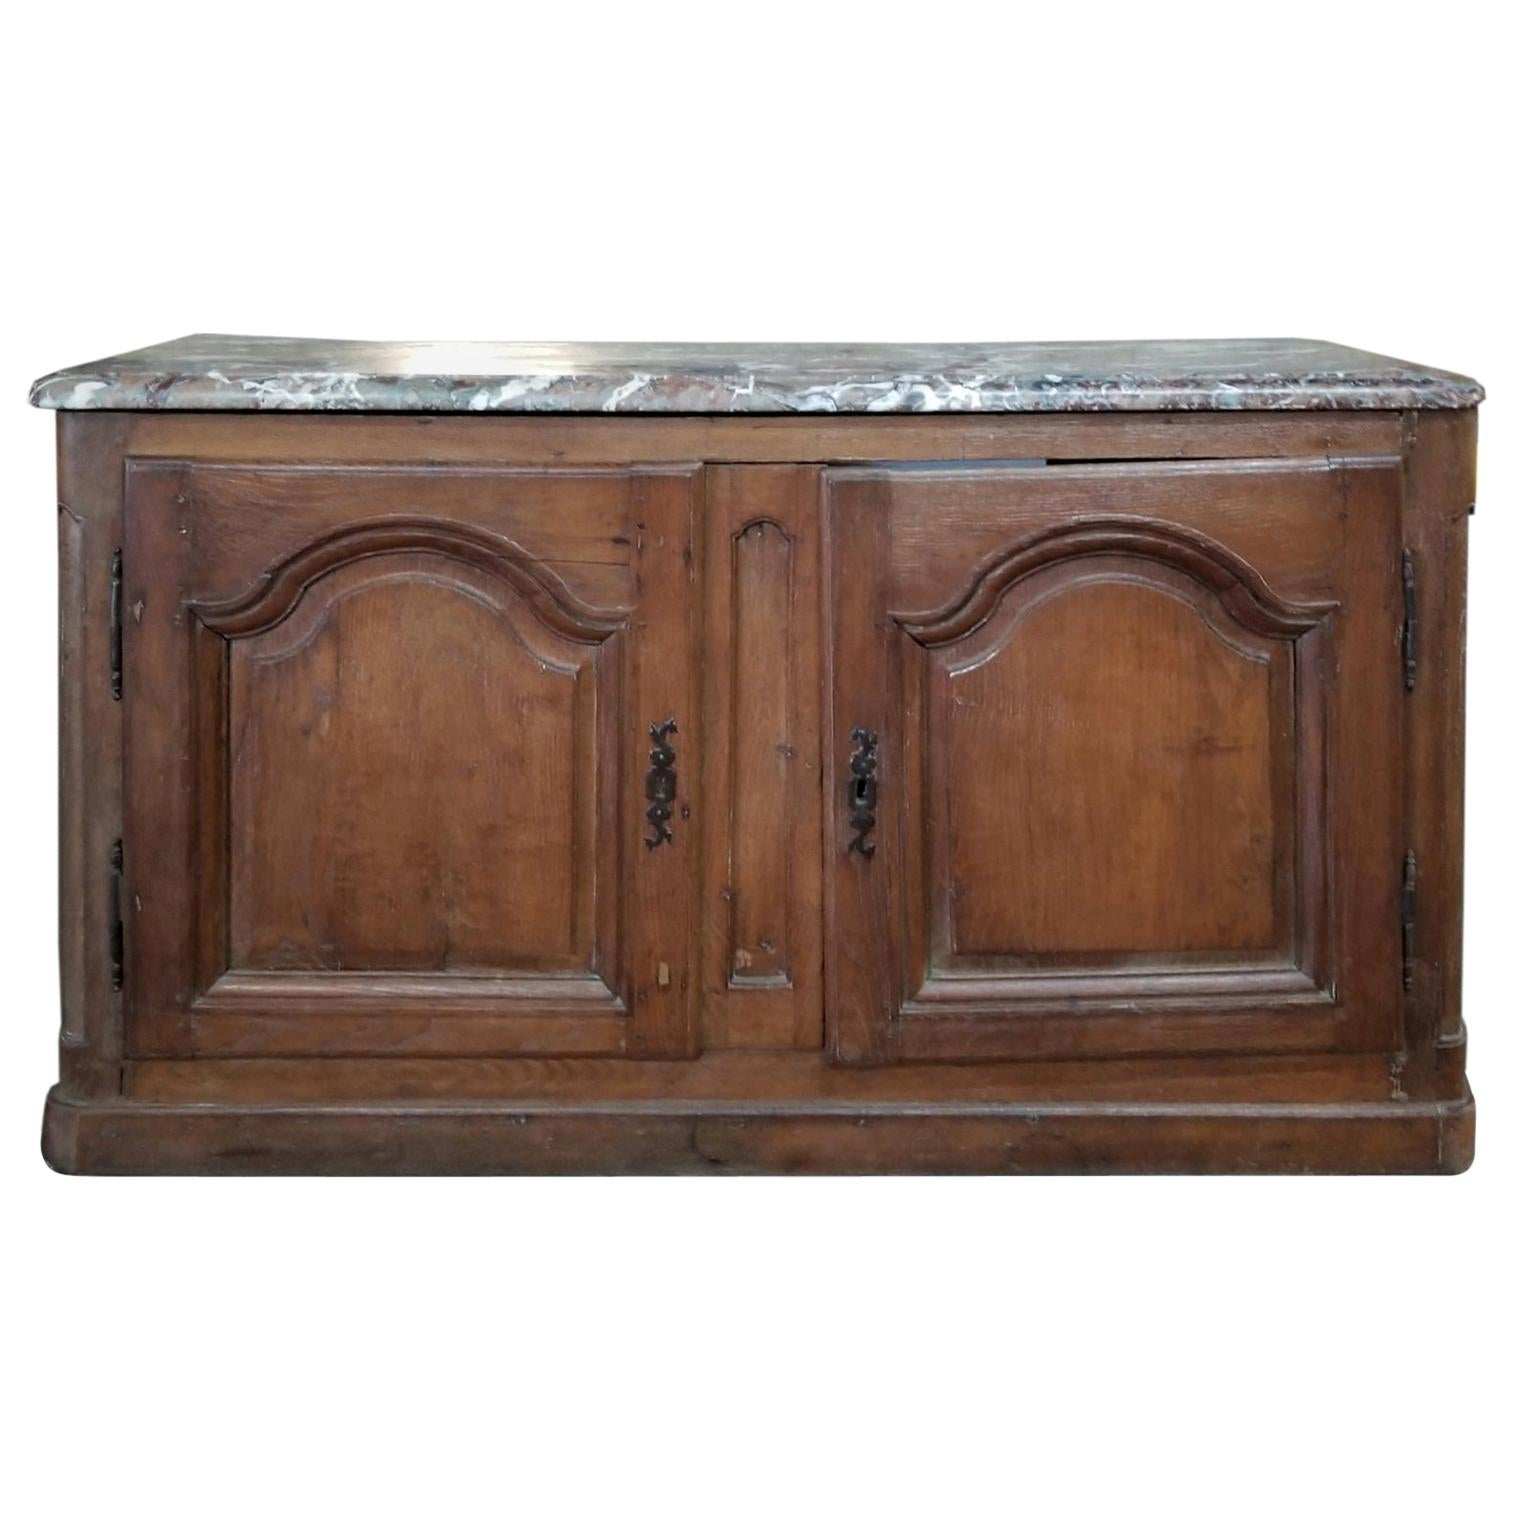 18th-19th Century French Louis XV Marble-Top Buffet, Mellow Finish For Sale